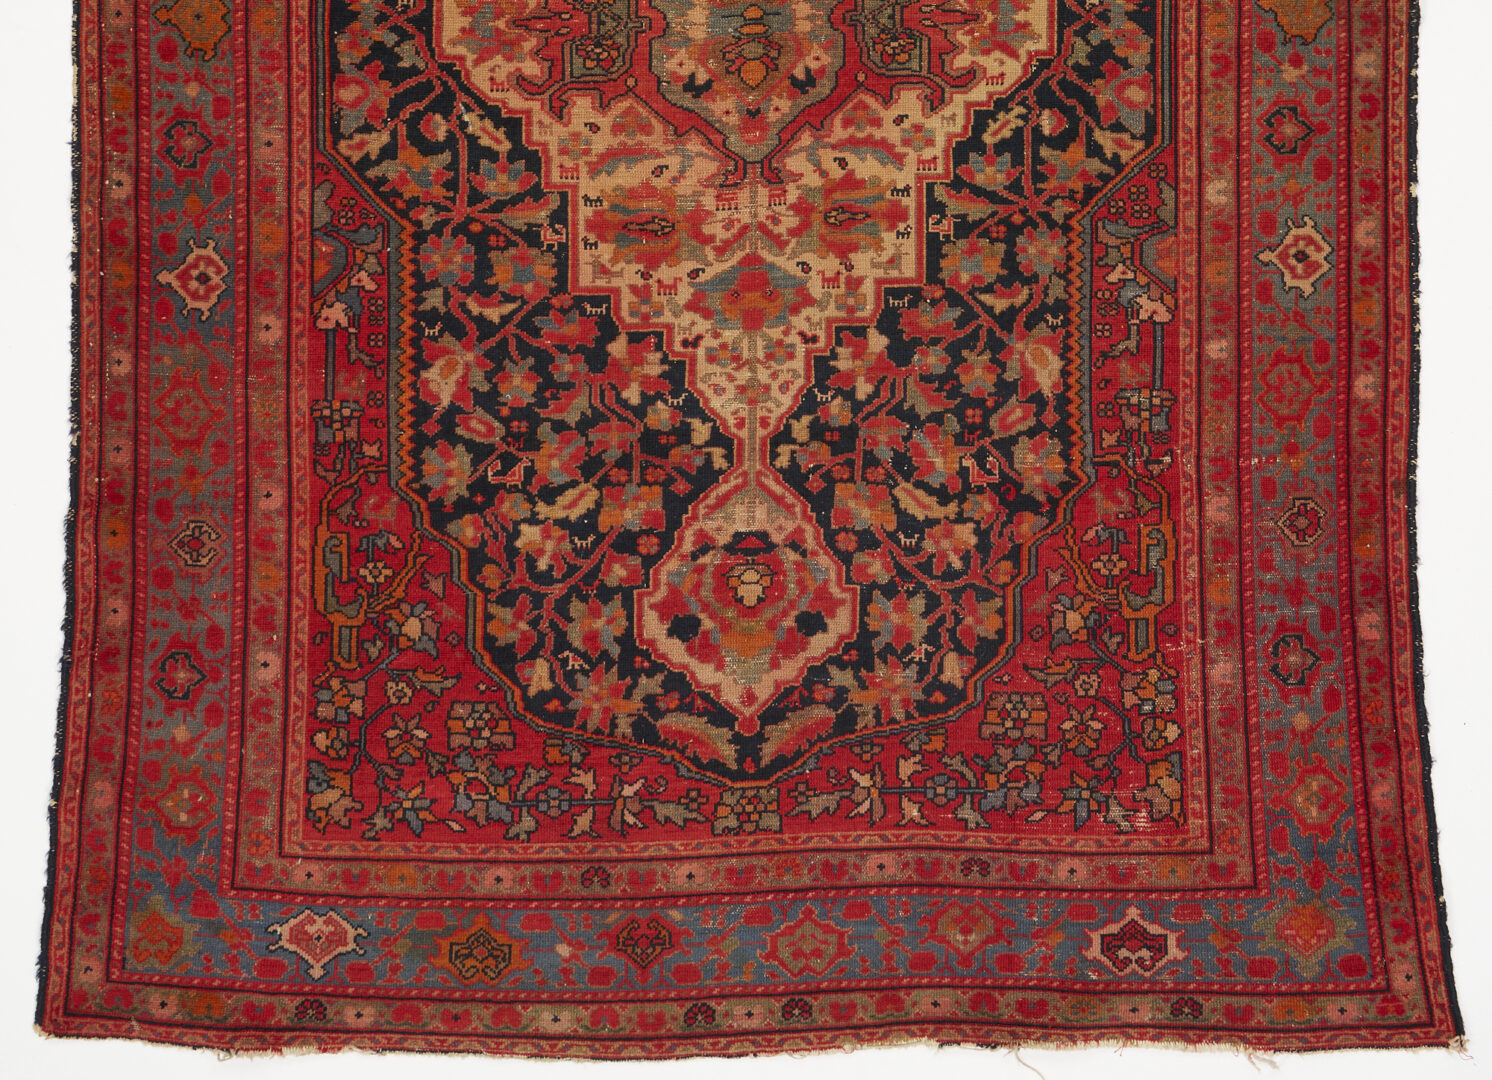 Lot 379: Two Persian / Iranian Area Rugs; Approx. 6' x 4'